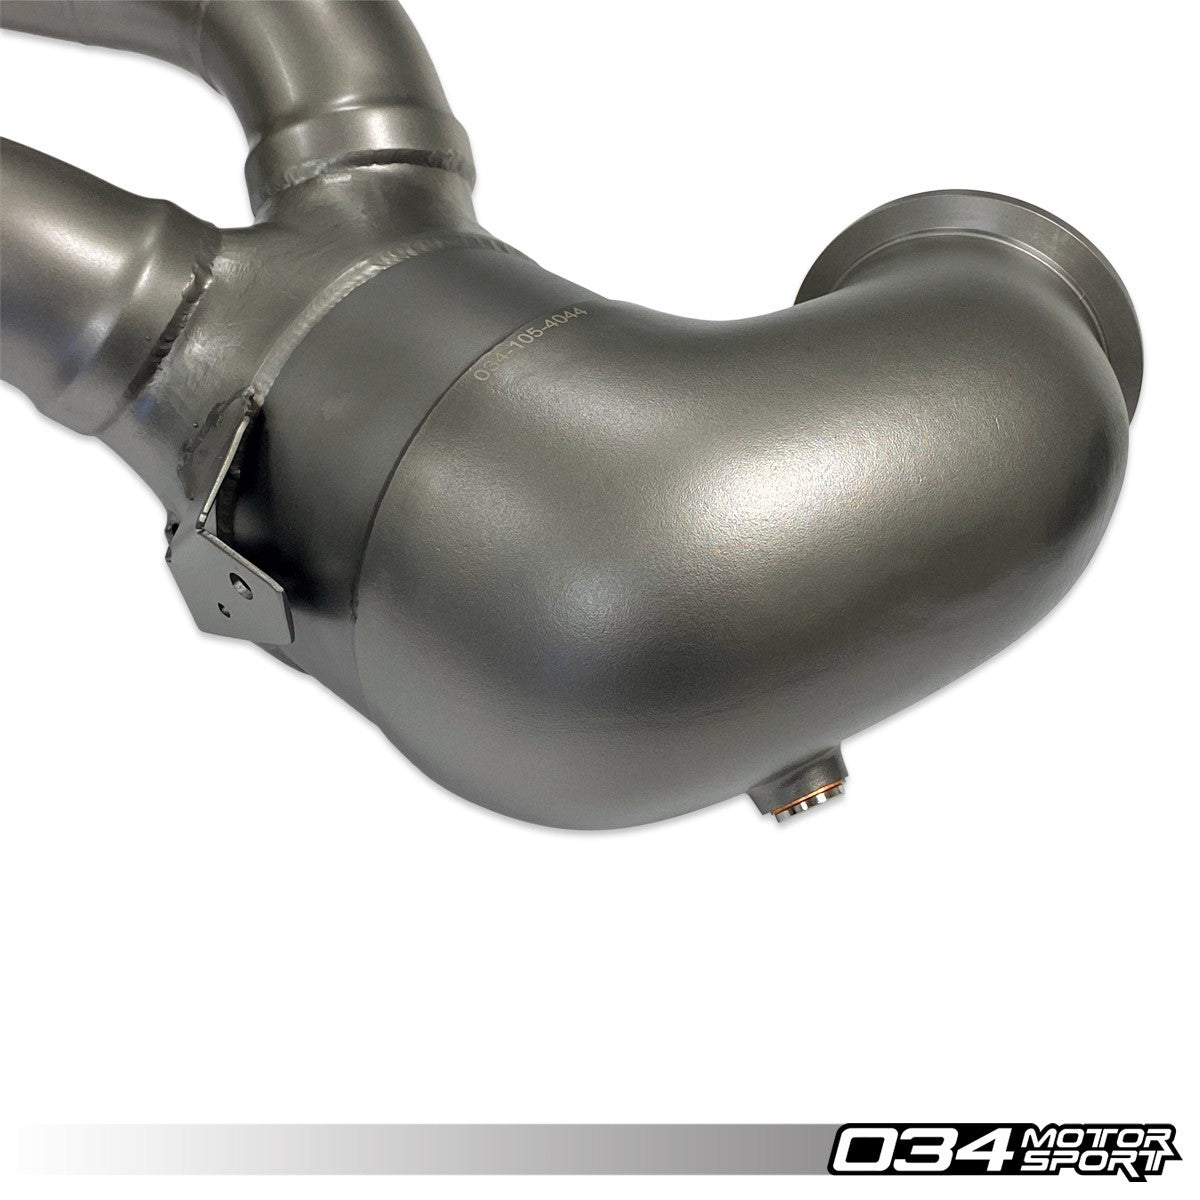 034Motorsport Cast Stainless Steel Performance Downpipe, Audi 8S TTRS, 8V.5  RS3 – New German Performance